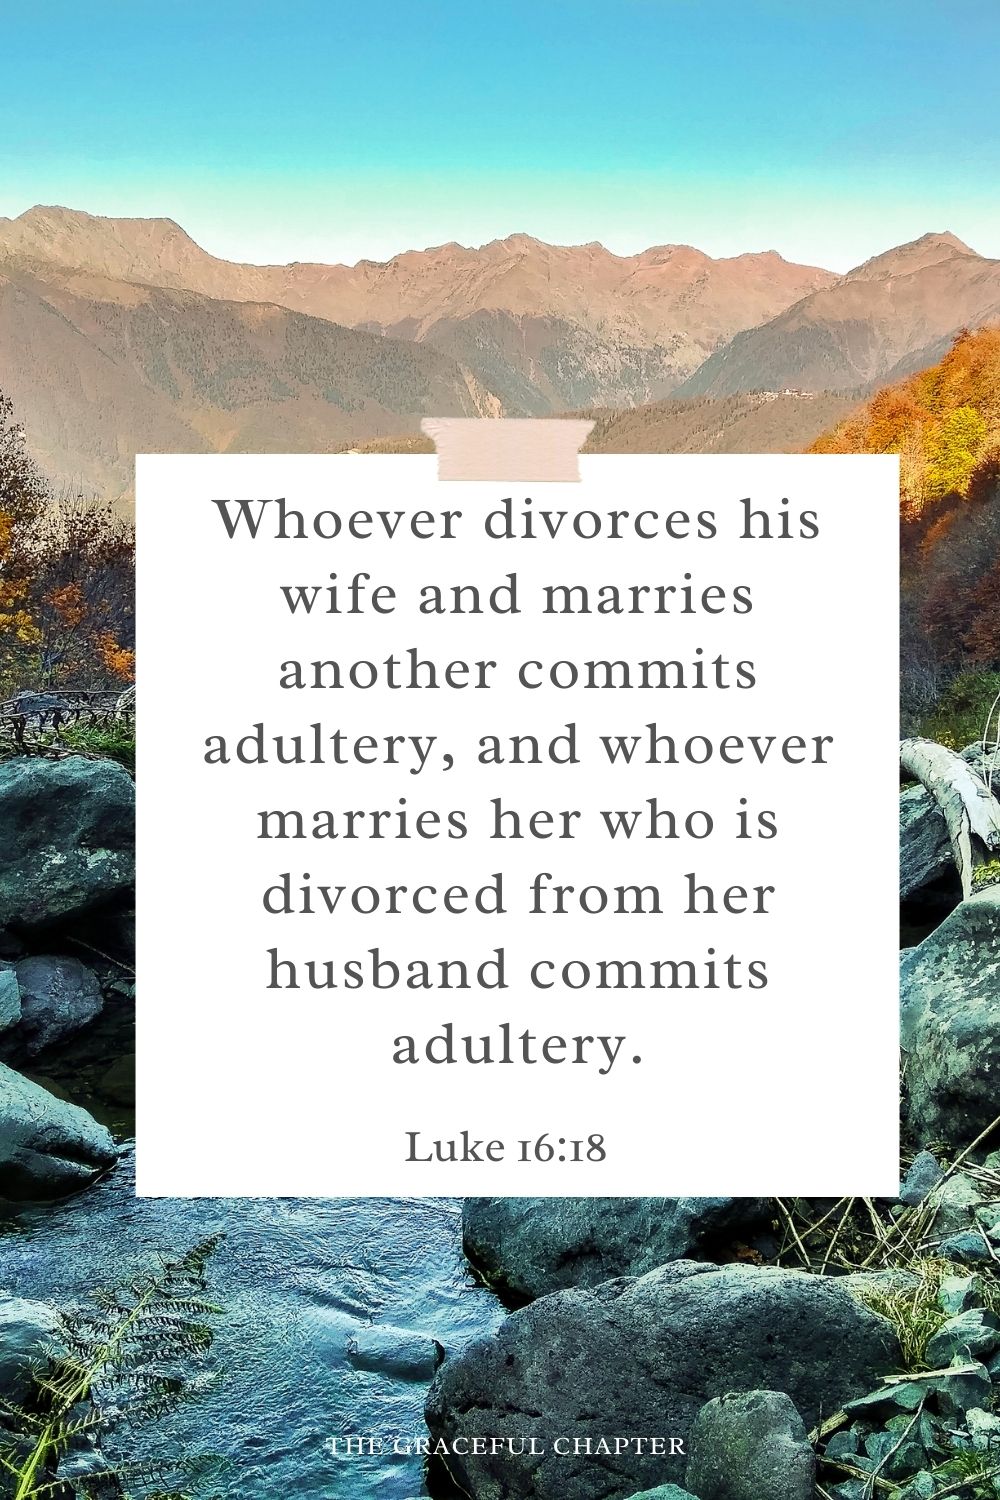 Whoever divorces his wife and marries another commits adultery, and whoever marries her who is divorced from her husband commits adultery. Luke 16:18